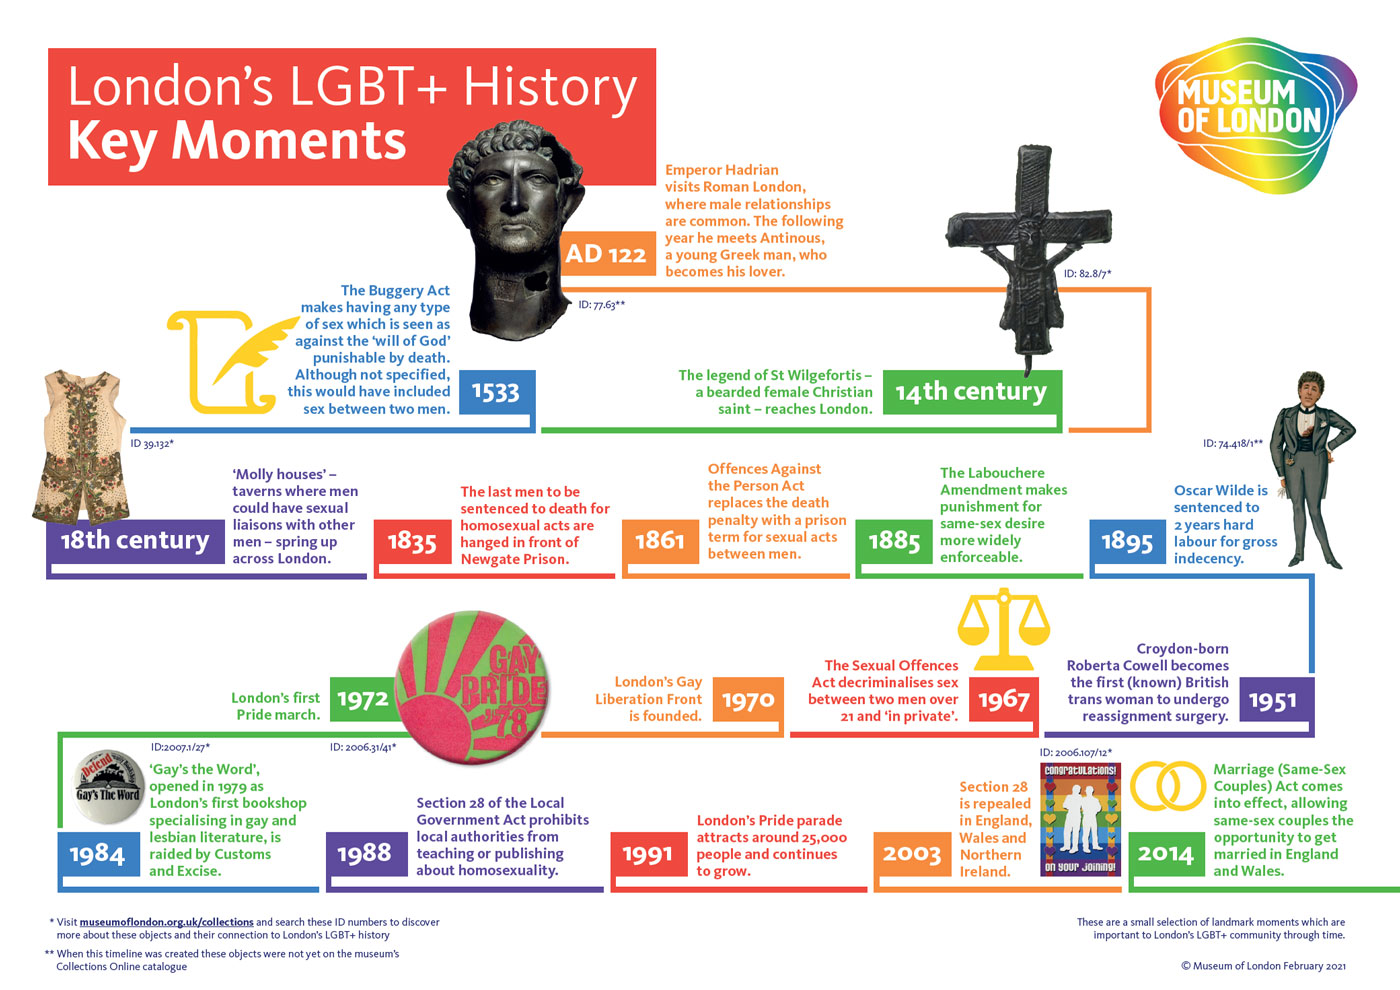 Colourful image showing the key moments in London's LGBT+ history from AD 122 to 2014.